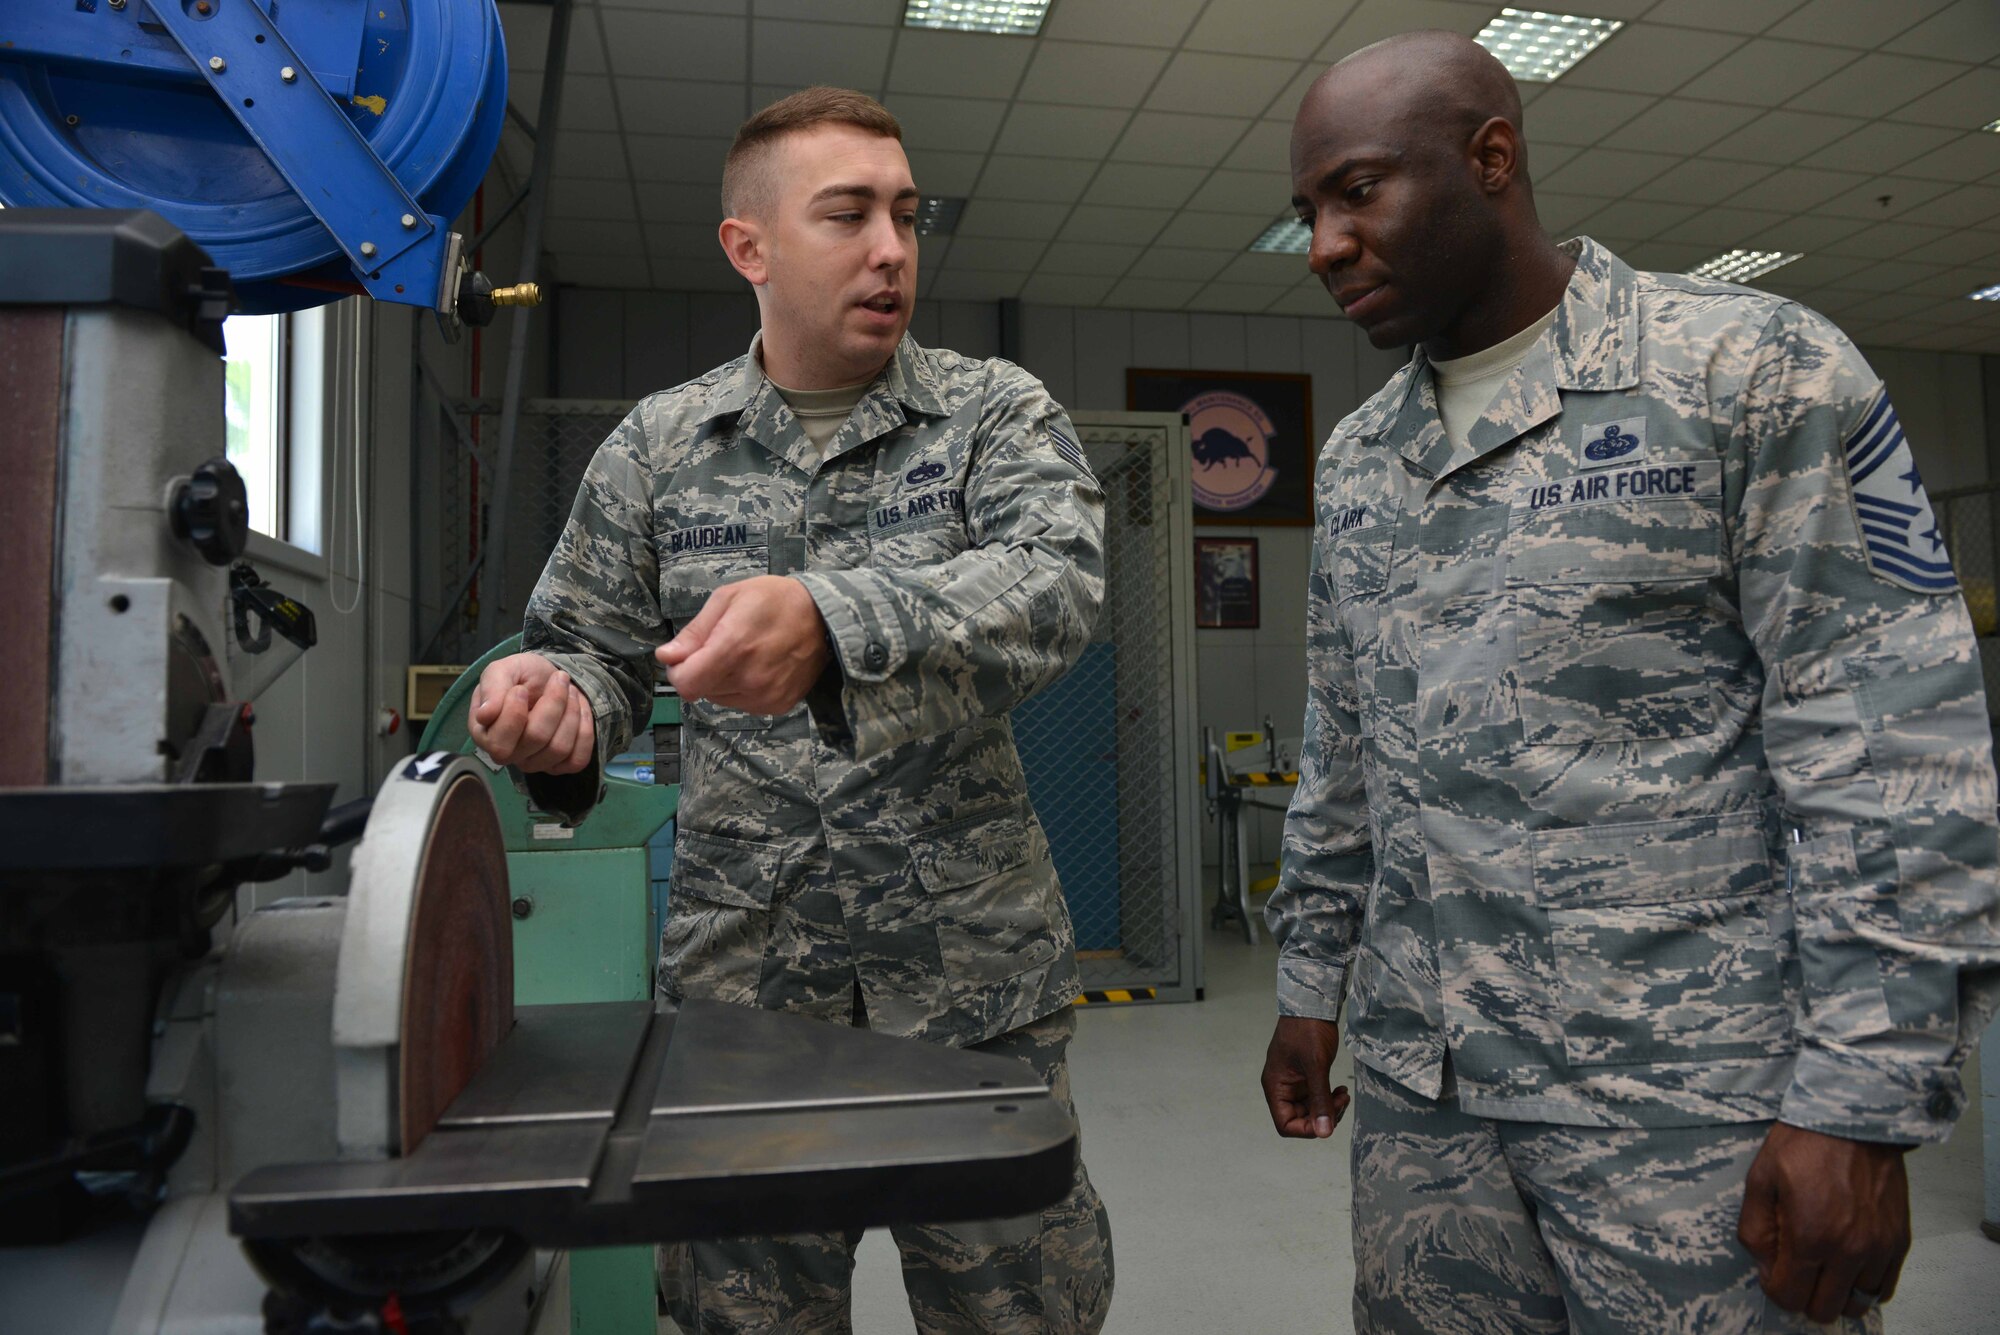 U.S. Air Force Staff Sgt. Justin Beaudean, 39th Maintenance Squadron structural maintenance craftsman, explains equipment operation to U.S. Air Force Chief Master Sgt. Vegas Clark, 39th Air Base Wing command chief, June 22, 2016, at Incirlik Air Base, Turkey. Clark visited the maintenance support flight to expand his knowledge and see the different sections’ functions. (U.S. Air Force photo by Senior Airman John Nieves Camacho/Released)